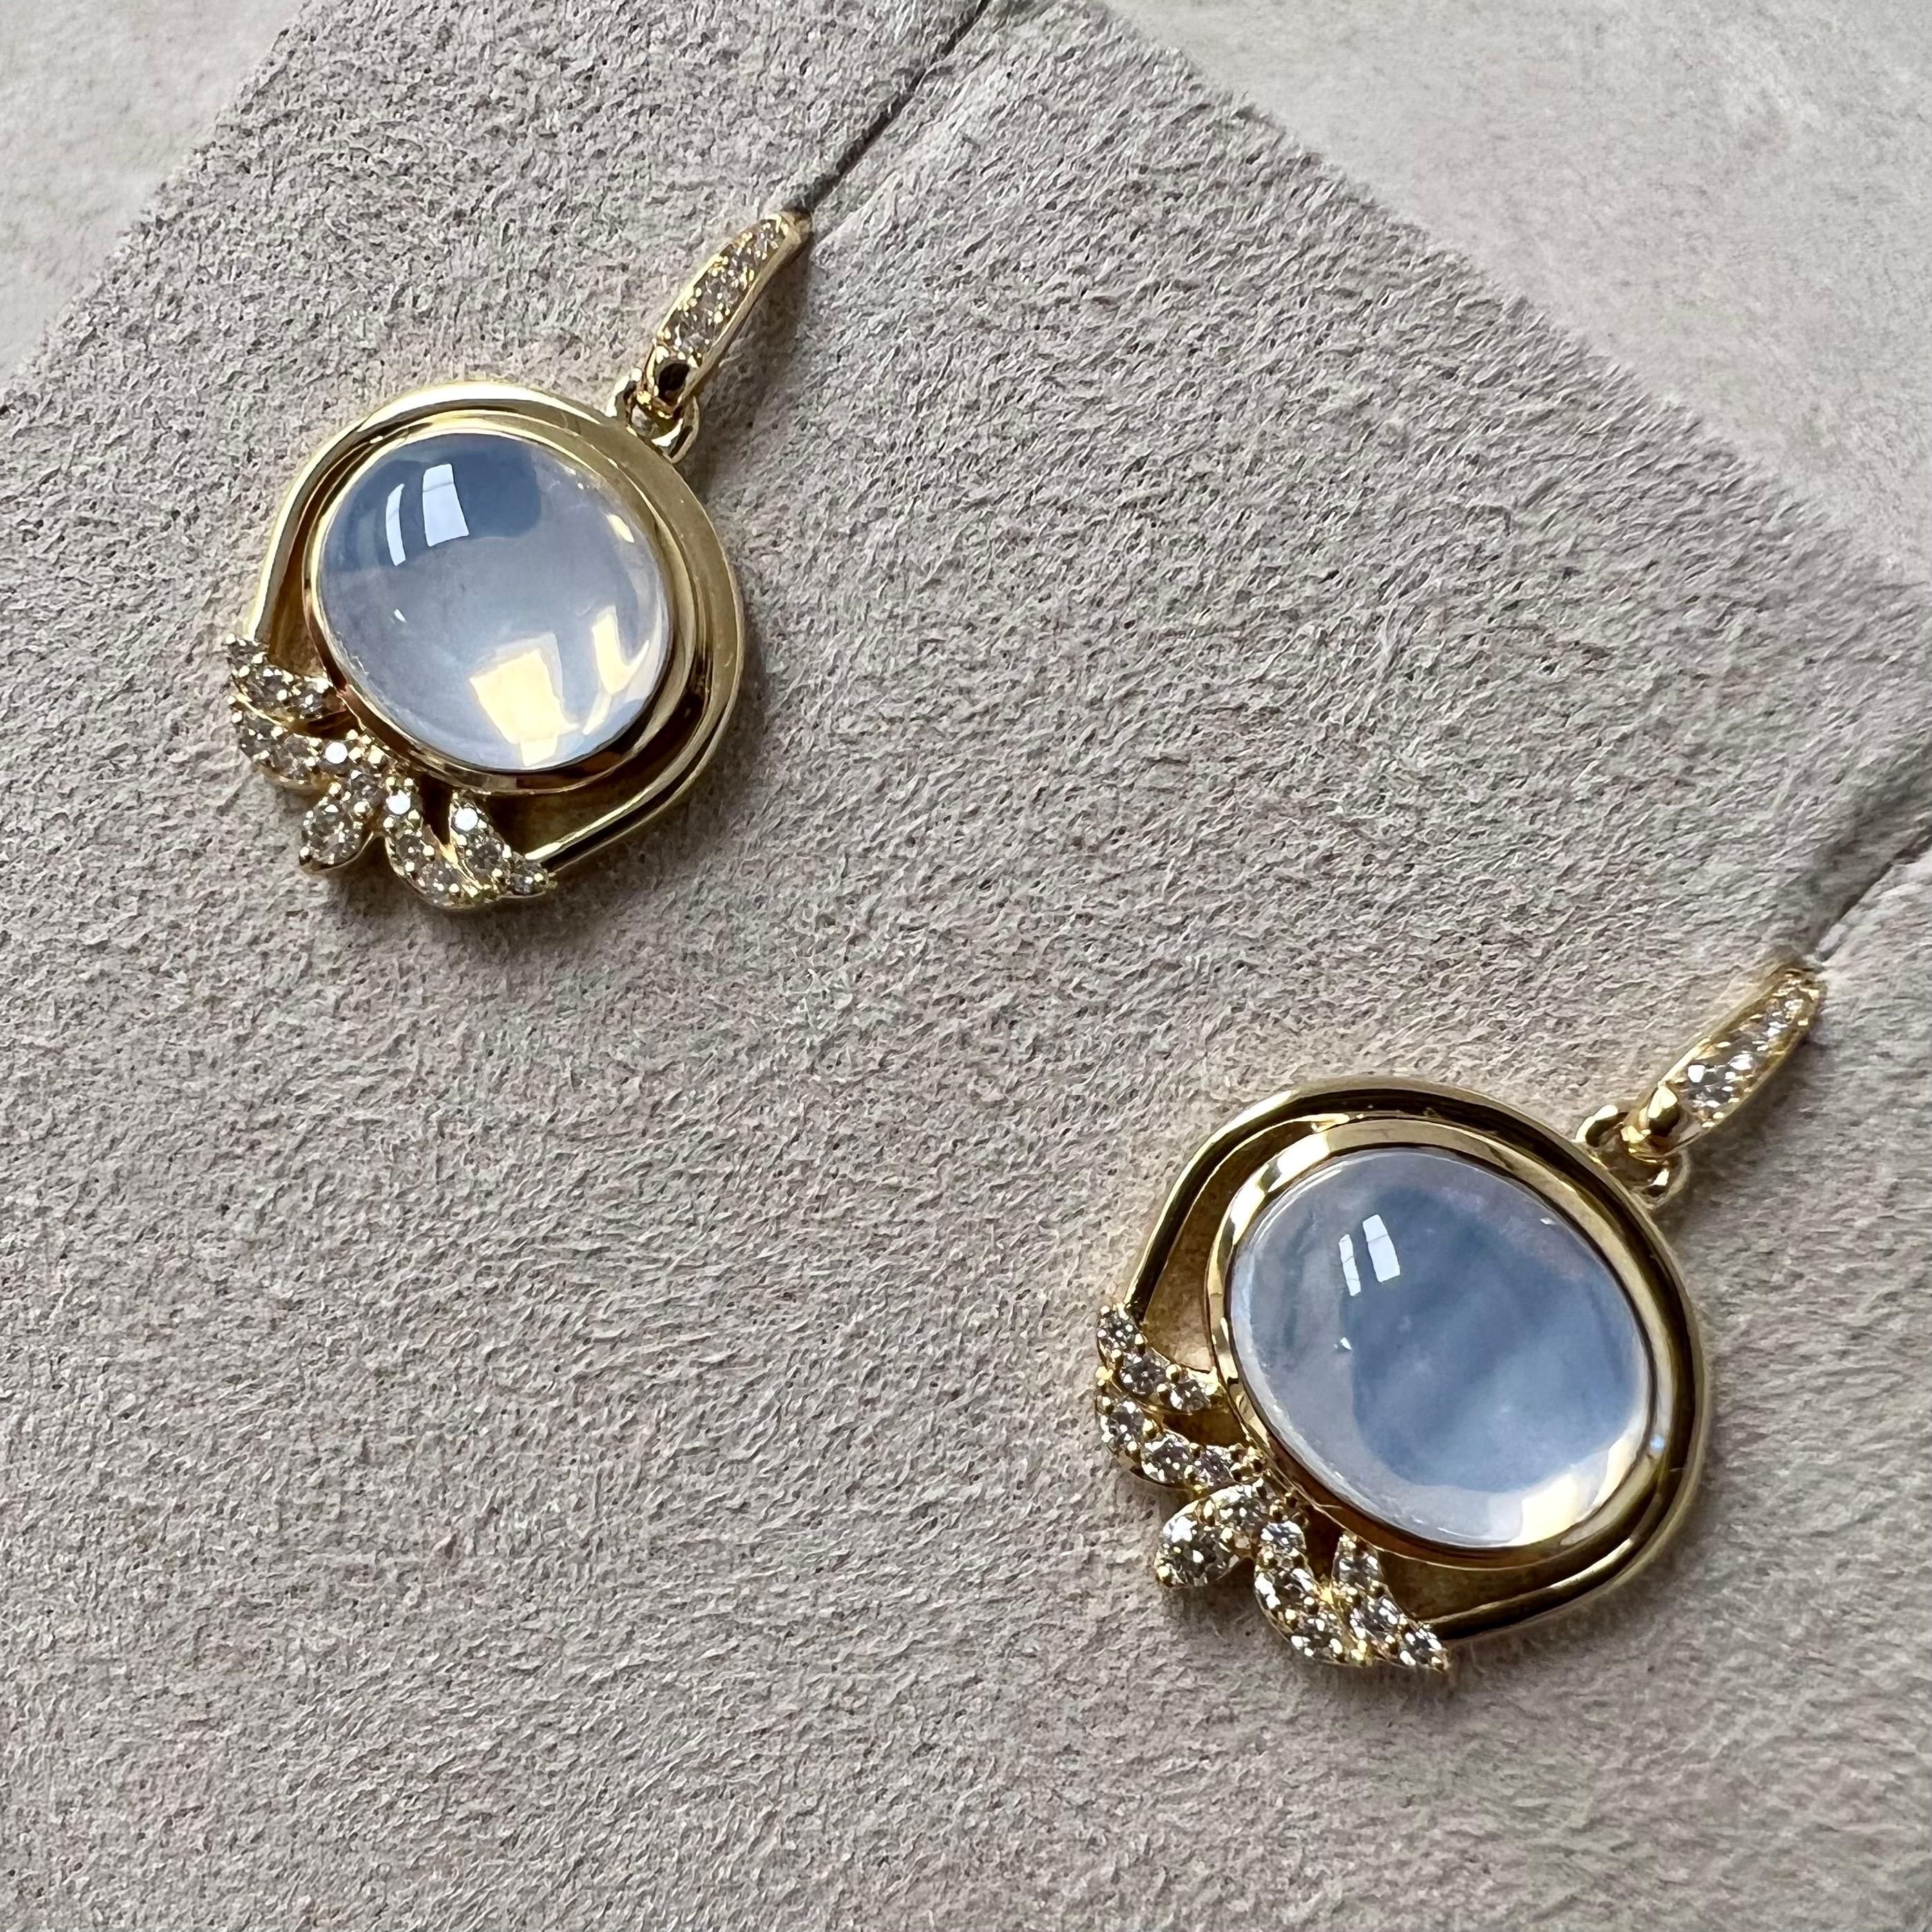 Created in 18 karat yellow gold
Moon quartz 7.50 carats approx.
Diamonds 0.25 carat approx.
French wire for pierced ears
Limited Edition

These exquisite Candy Blue Topaz and Lemon Quartz Sugarloaf Earrings are of the finest quality, created in 18